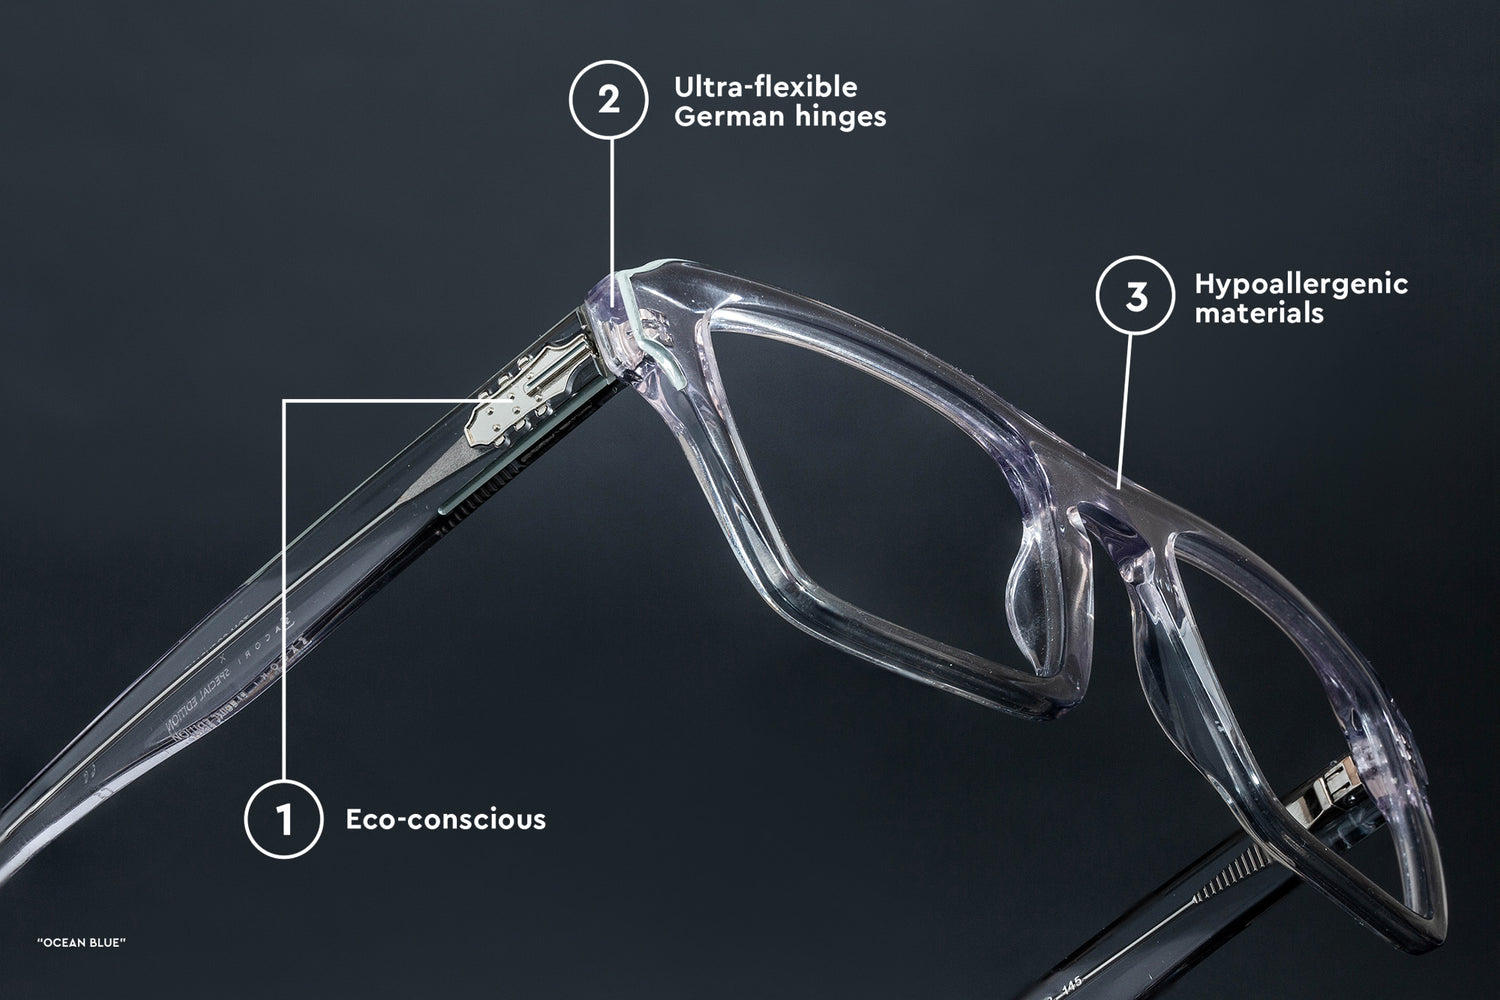 The parts of a typical eyeglass